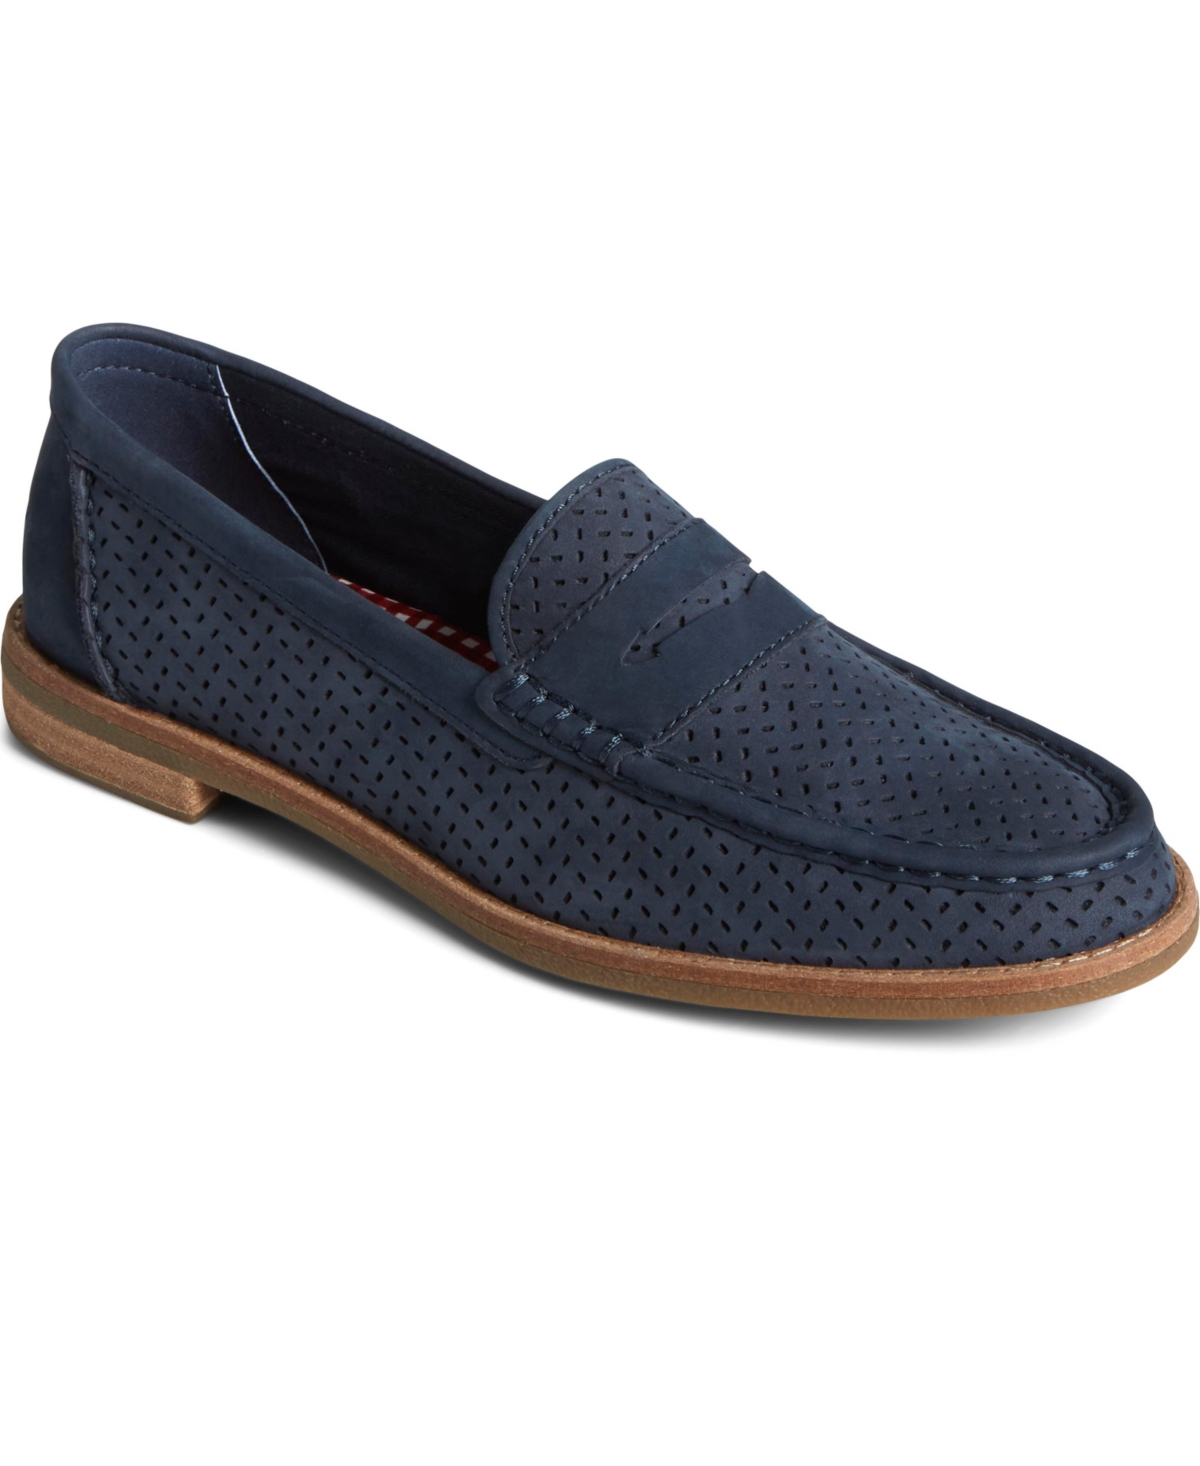 Women's Seaport Penny Leather Navy Loafers - Navy